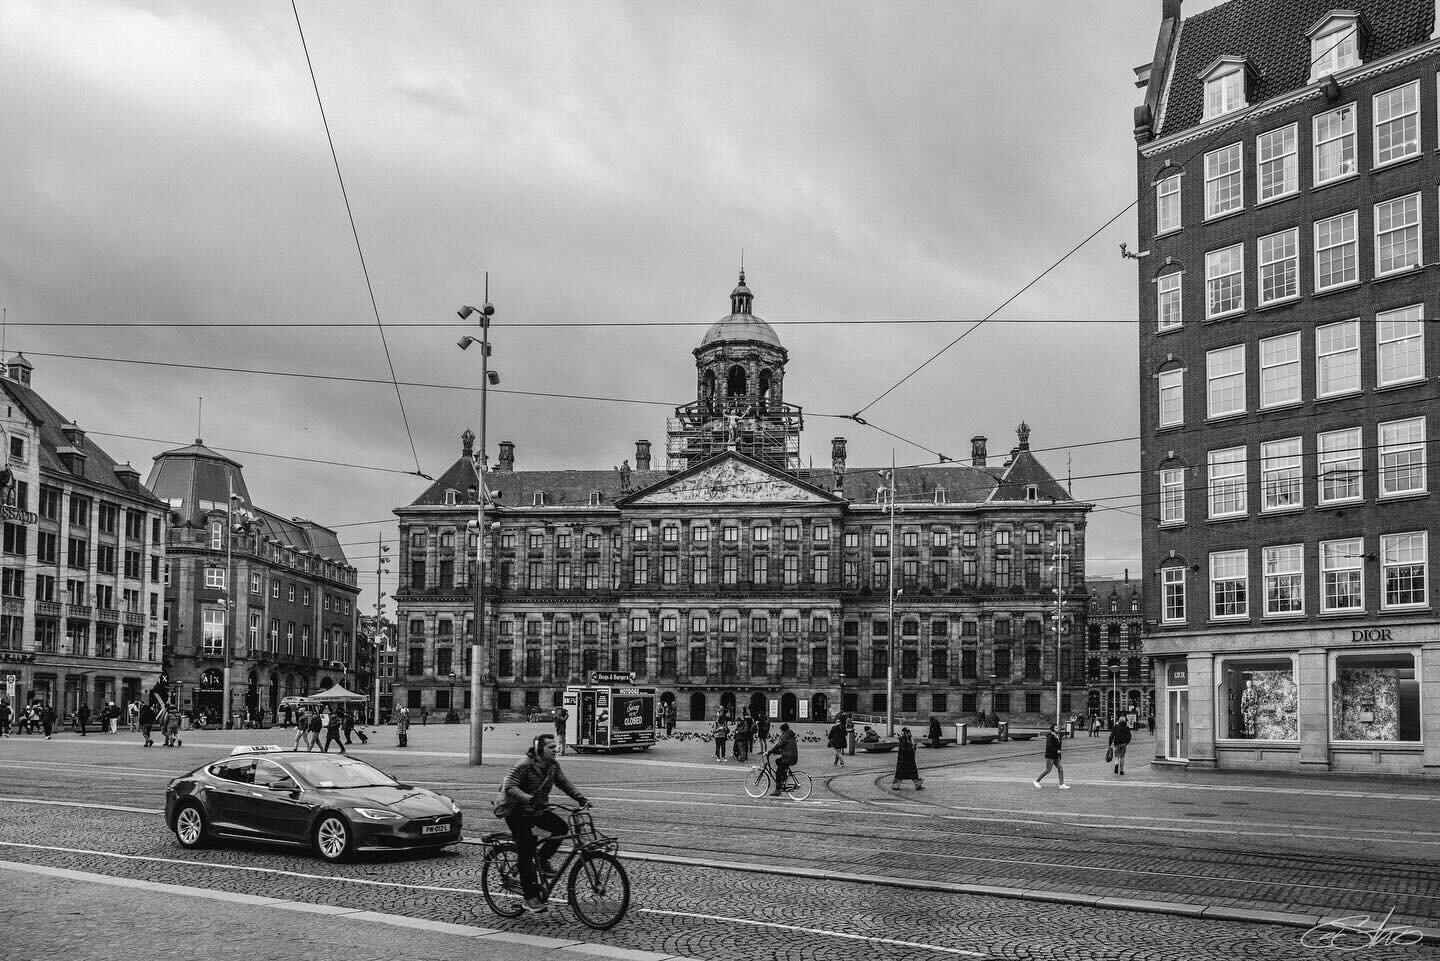 [10 images]
Hauling my full-size camera around the crowded tourist areas in Amsterdam paid off. Getting up a little earlier than everyone else didn&rsquo;t hurt either. First lesson learned for travels: get a more competent small camera, and that&rsq